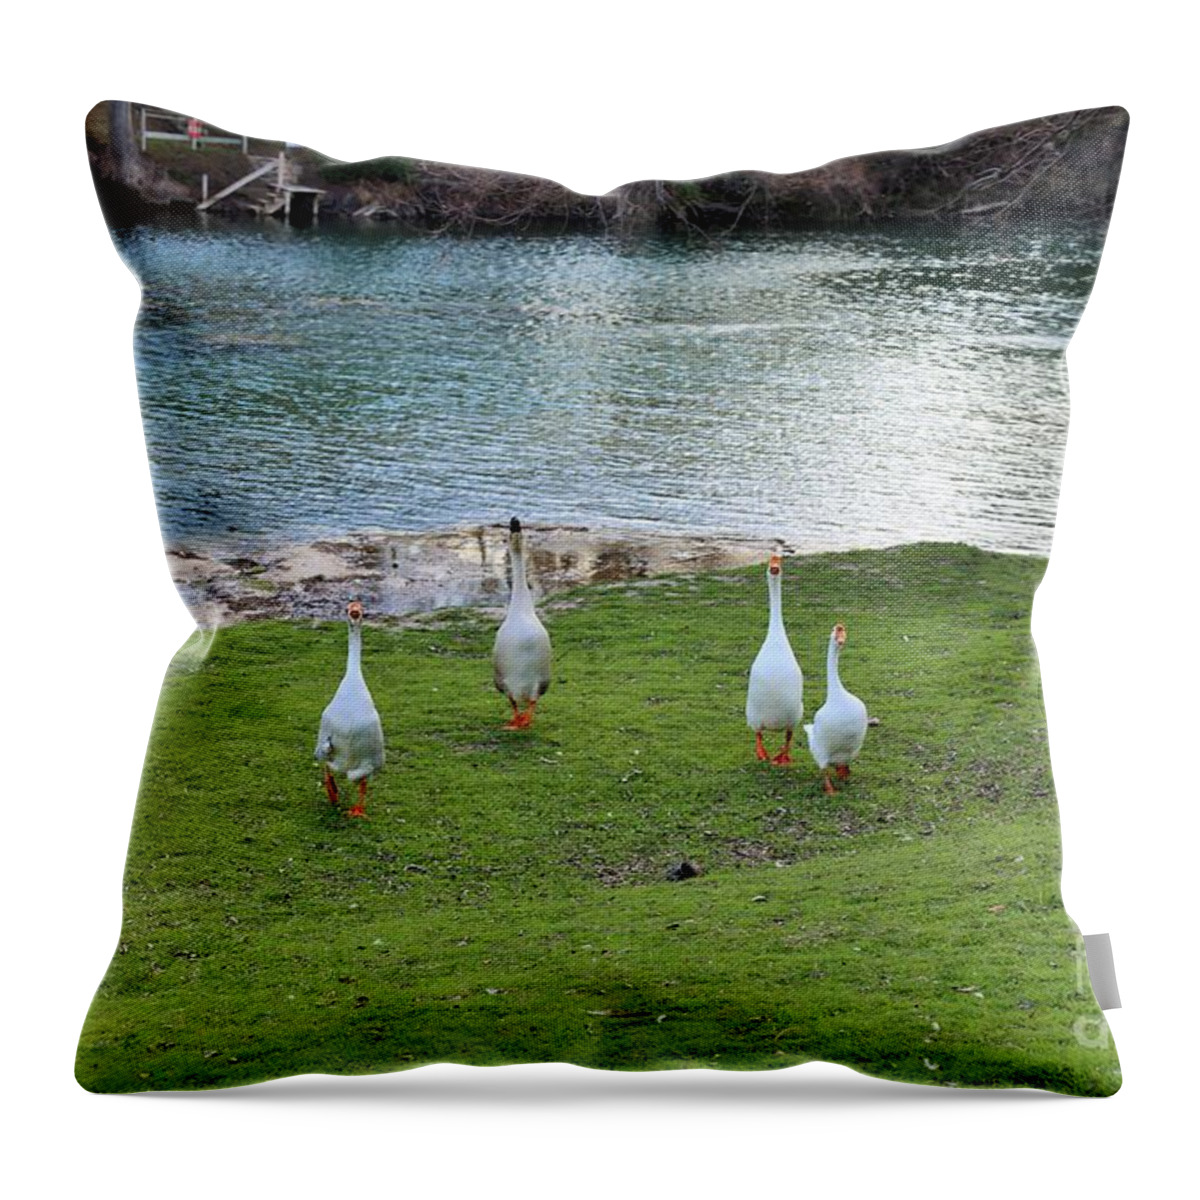  Throw Pillow featuring the photograph Trouble by Jeff Downs